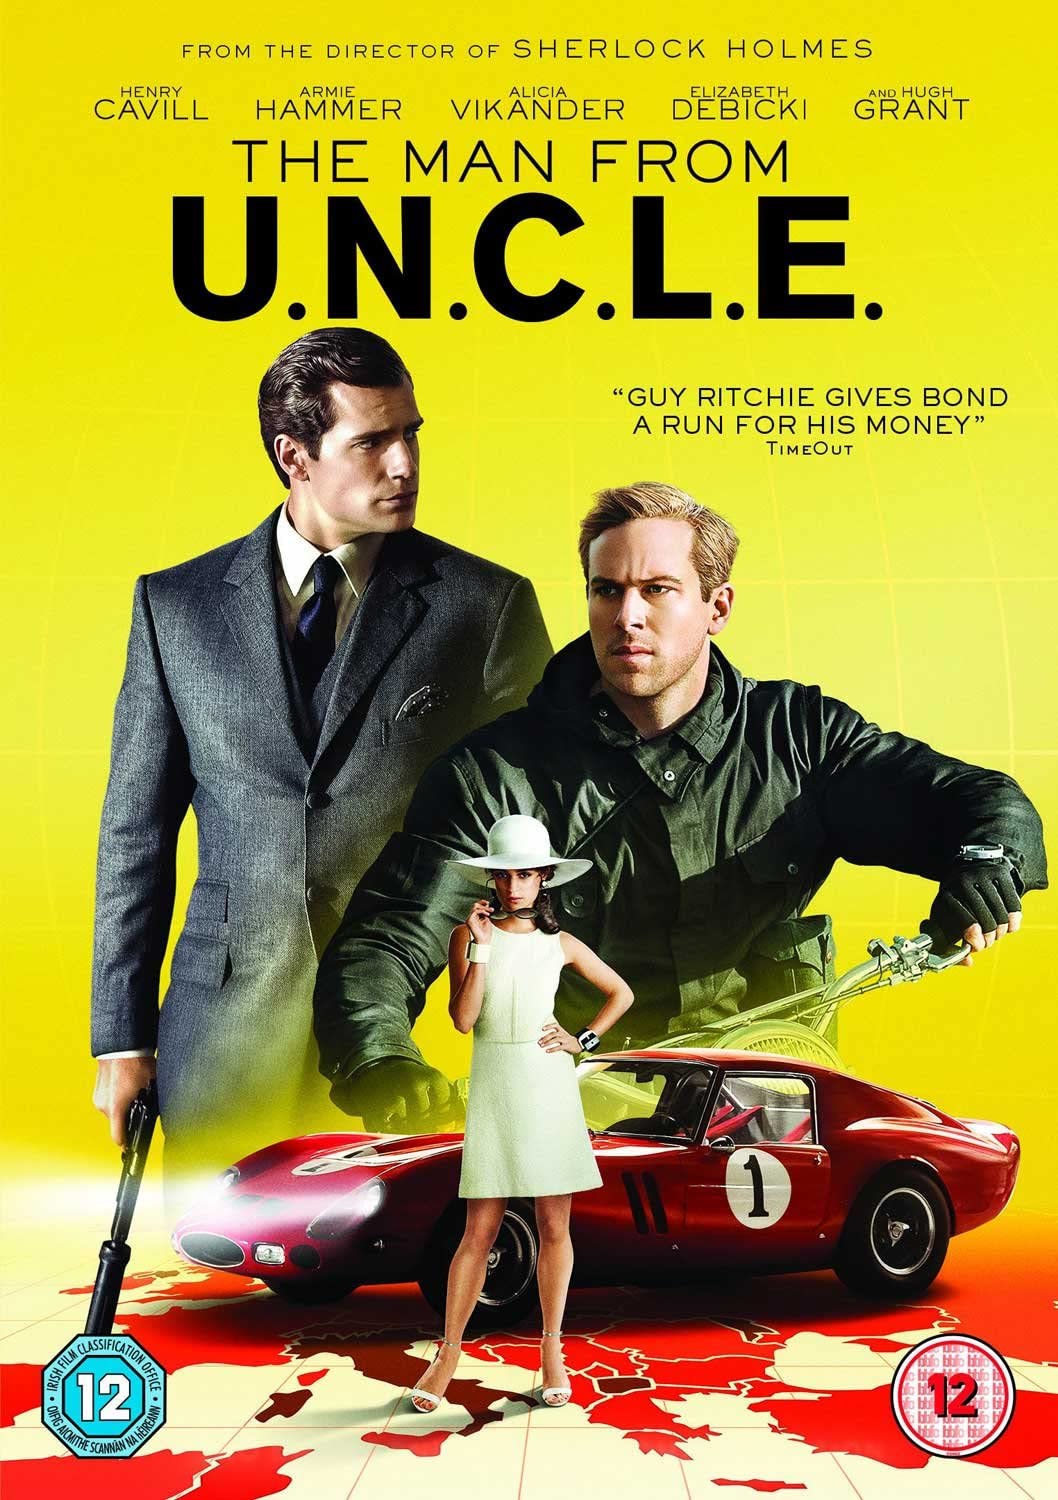 The Man From UNCLE [2015] - Action [DVD]